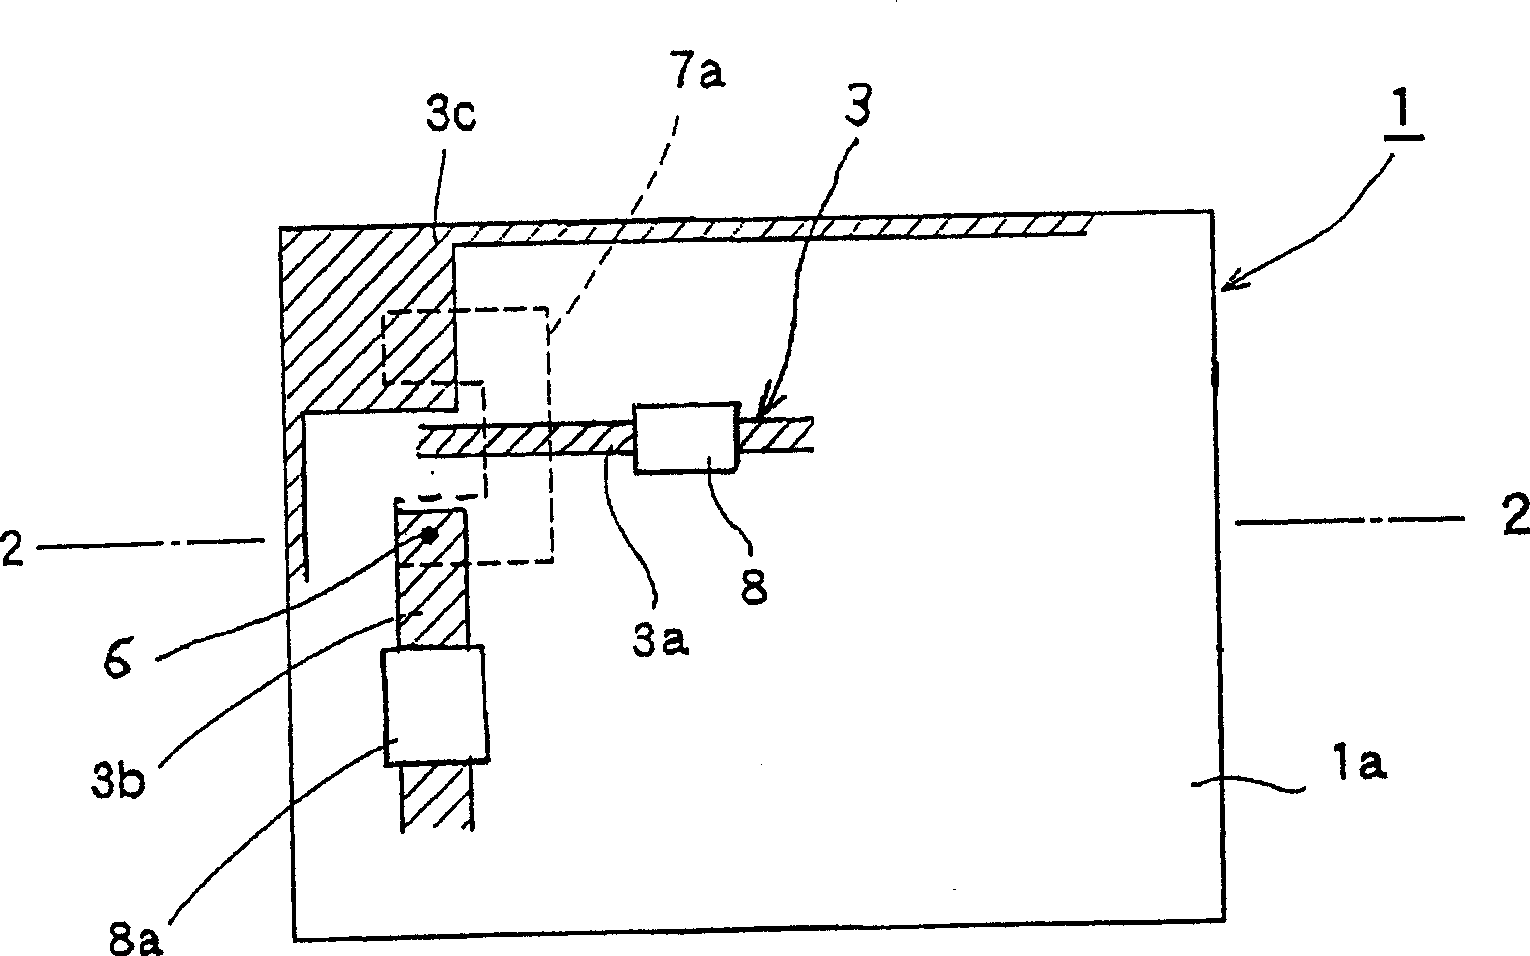 Voltage controlled oscillator small in reduction of inductance and Q